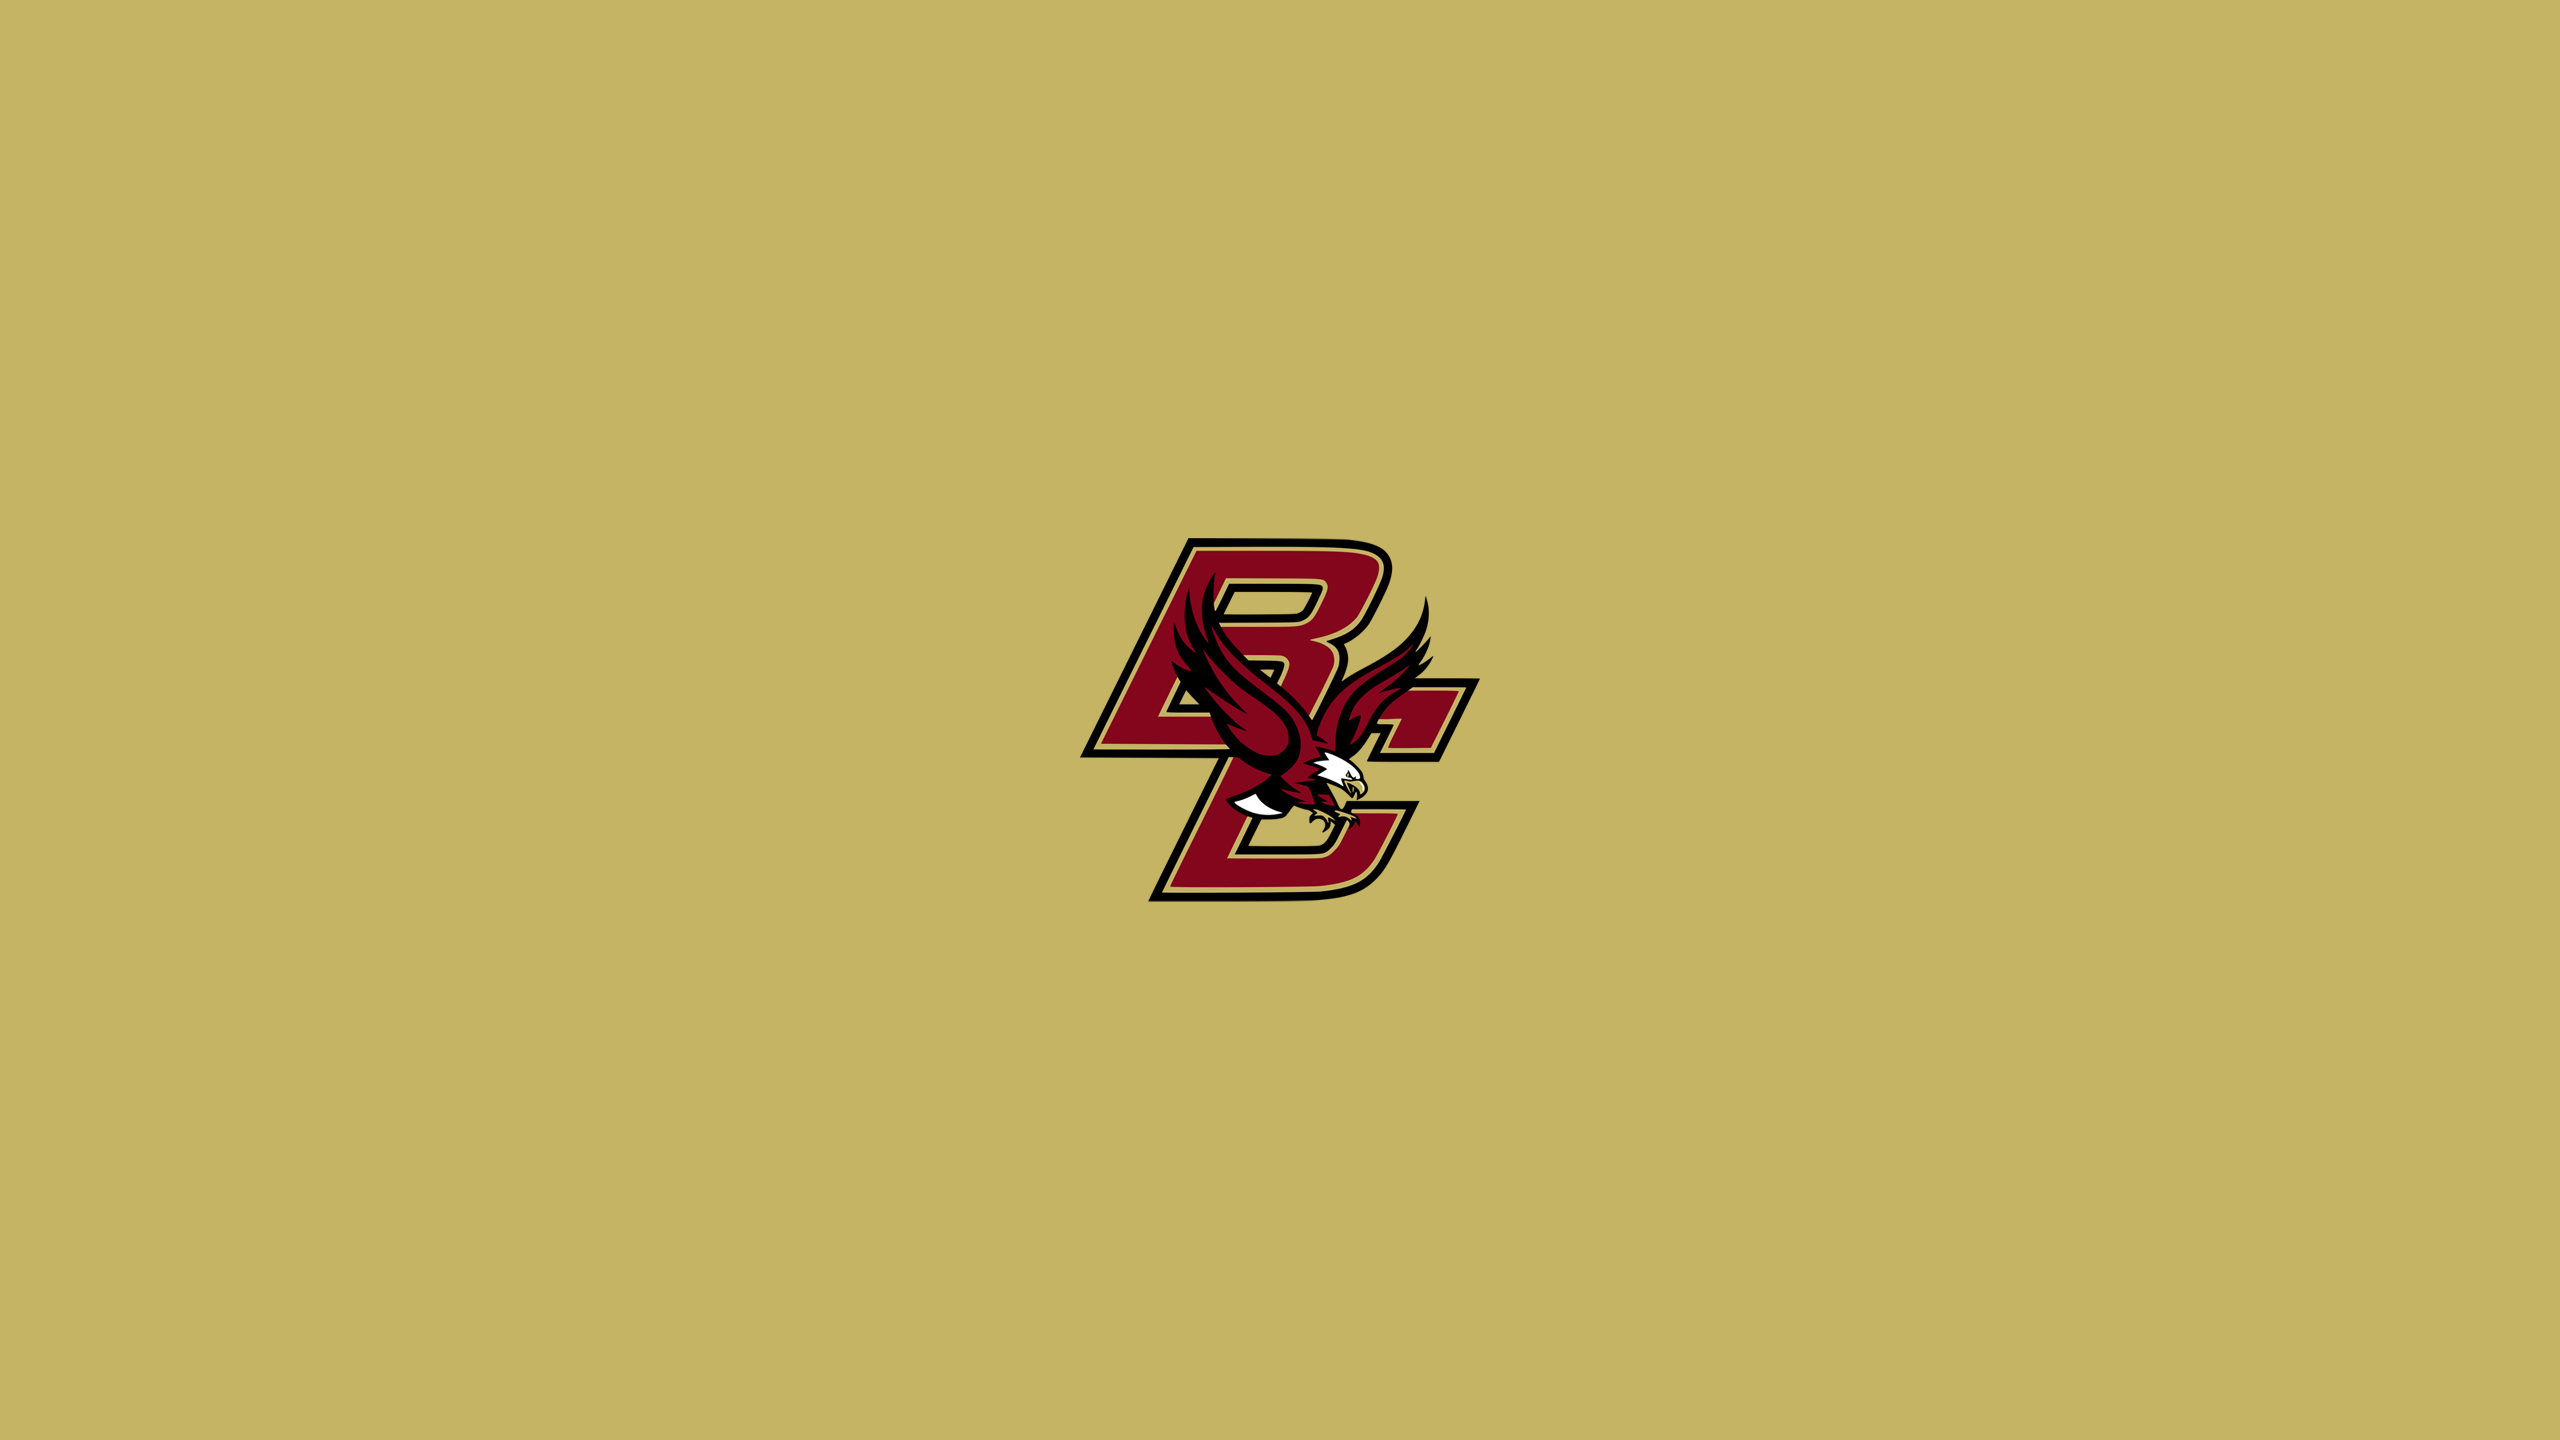 Boston College Eagles Football - NCAAF - Square Bettor